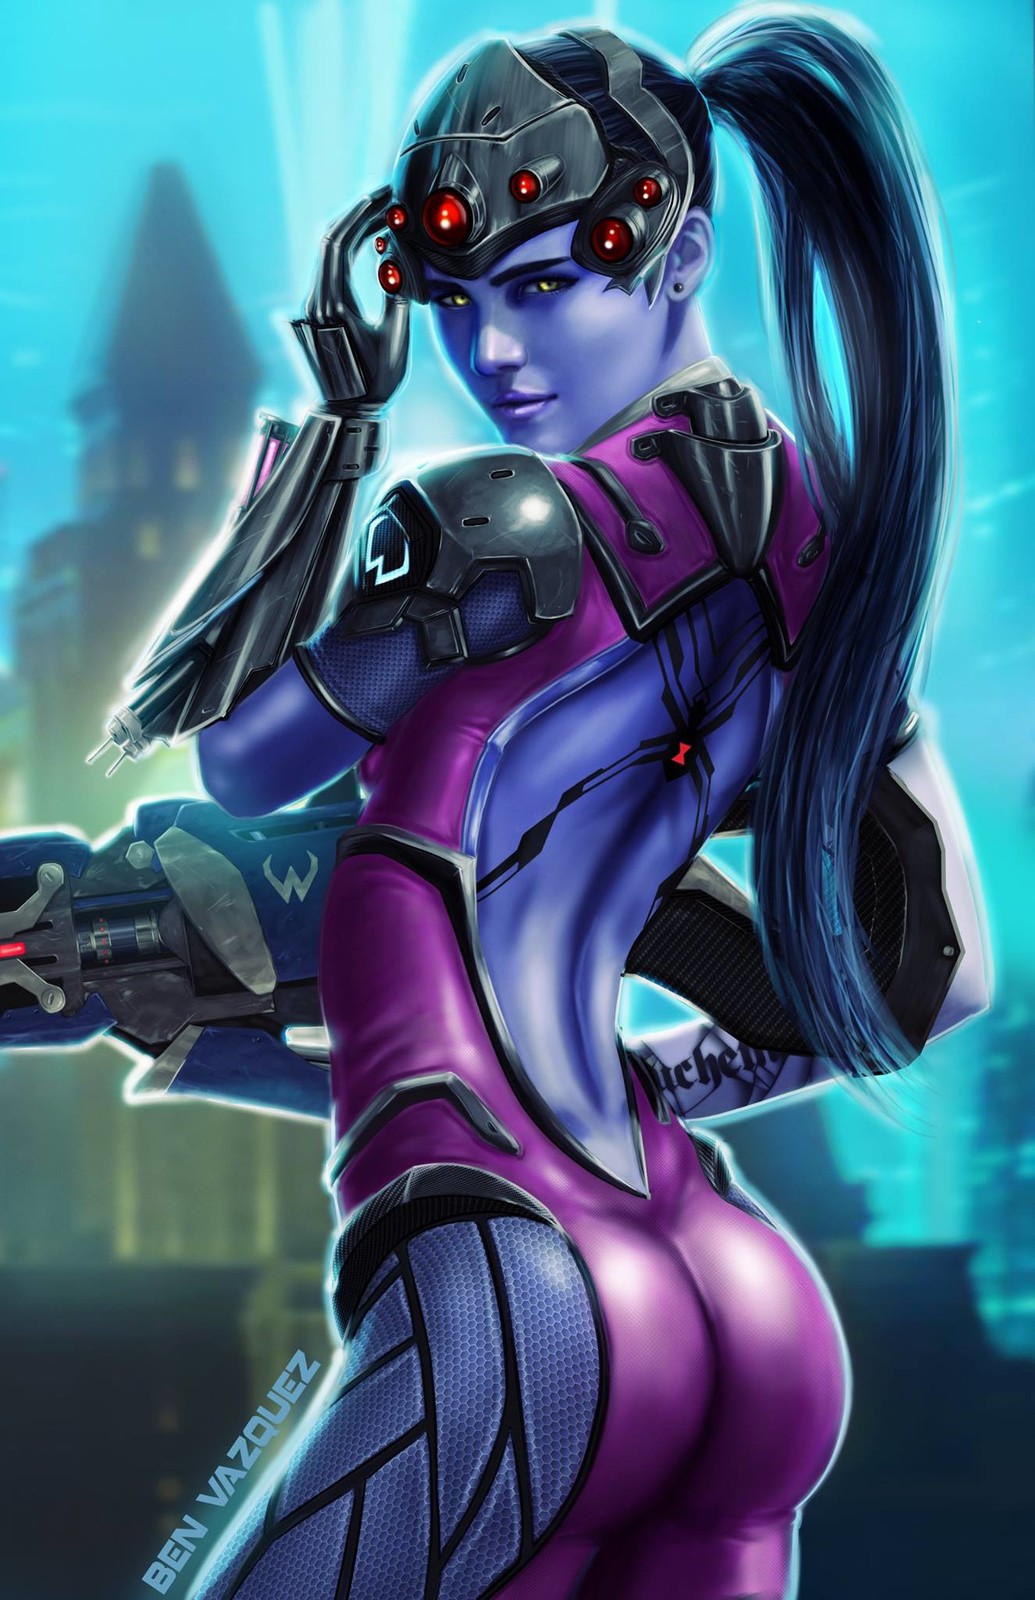 Widow maker from Overwatch Blizzard Entertainment's first person shoot...